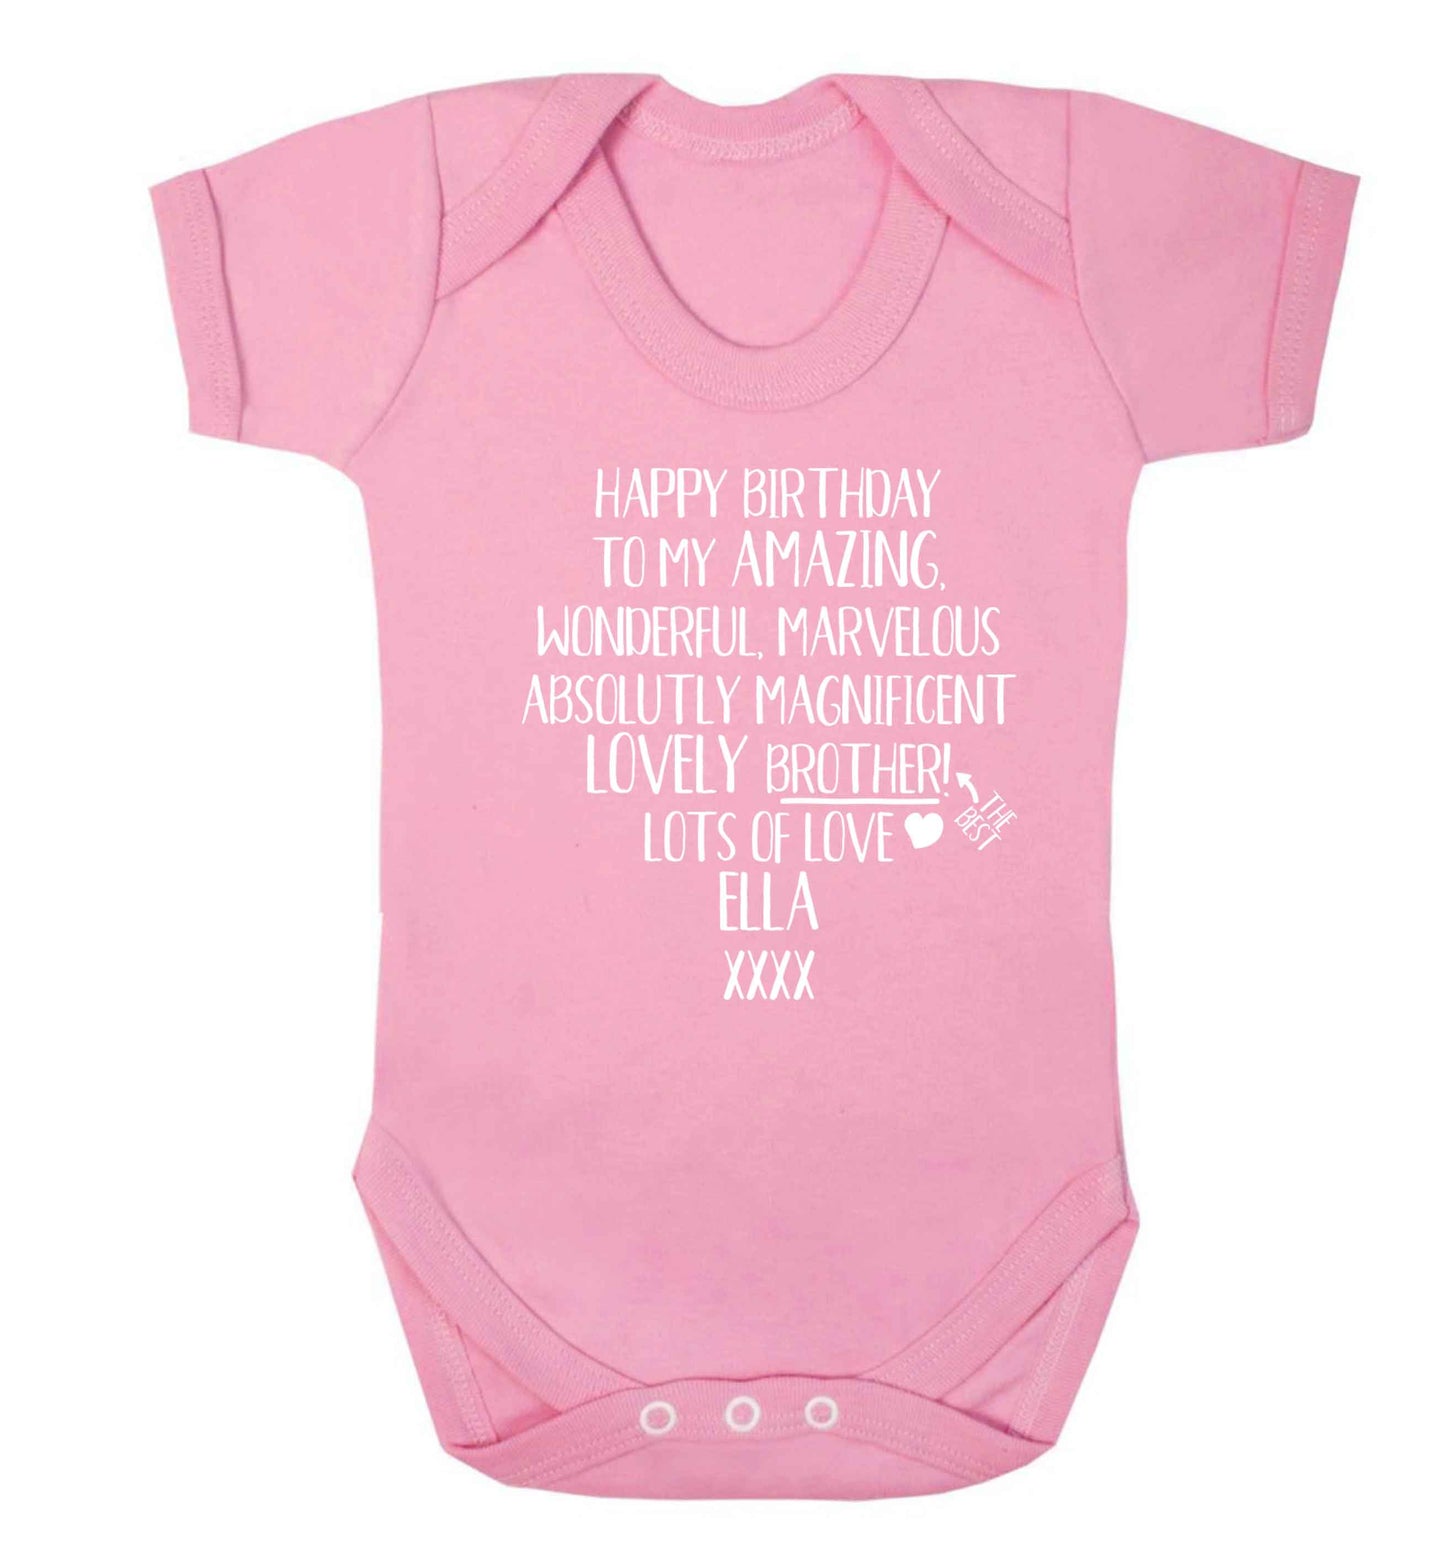 Personalised happy birthday to my amazing, wonderful, lovely brother Baby Vest pale pink 18-24 months